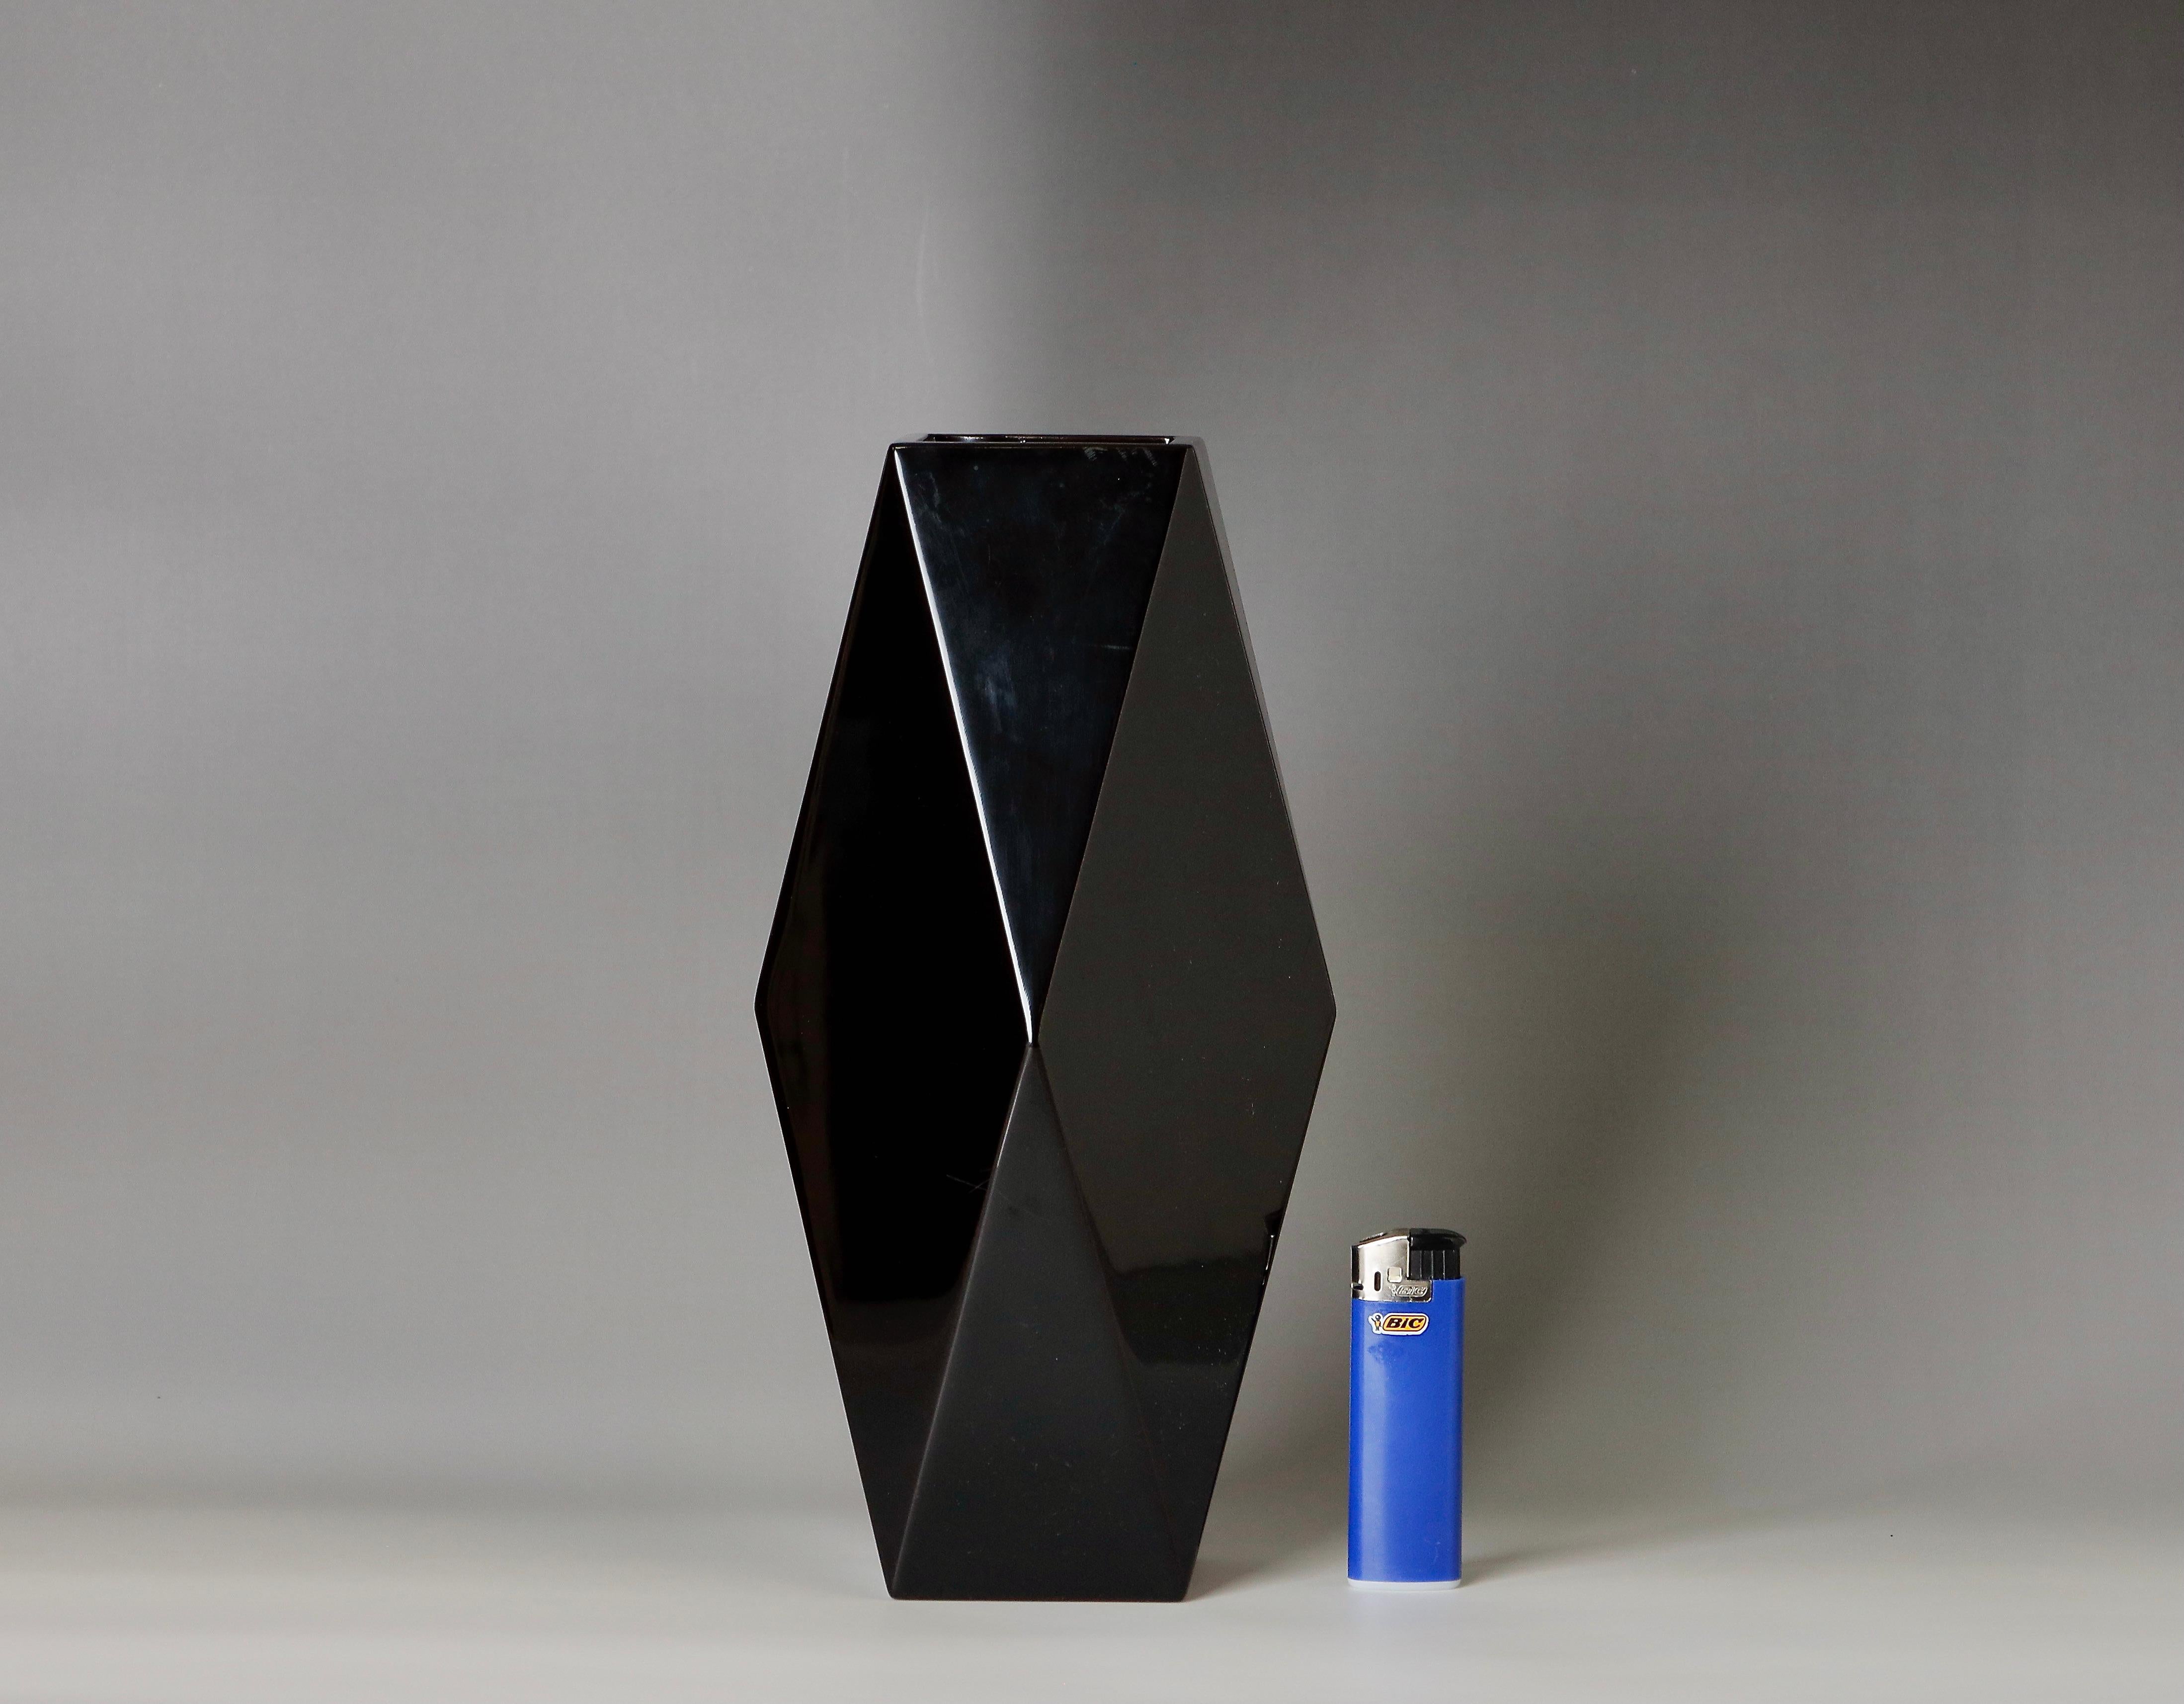 Gorgeous Contemporary Lacquer Vase with Original Signed Box.

Dating from the Showa period in the 20th century, this stunning piece is crafted by the renowned Japanese artist Wajima Senshudo. It features a deep black color and is in good condition